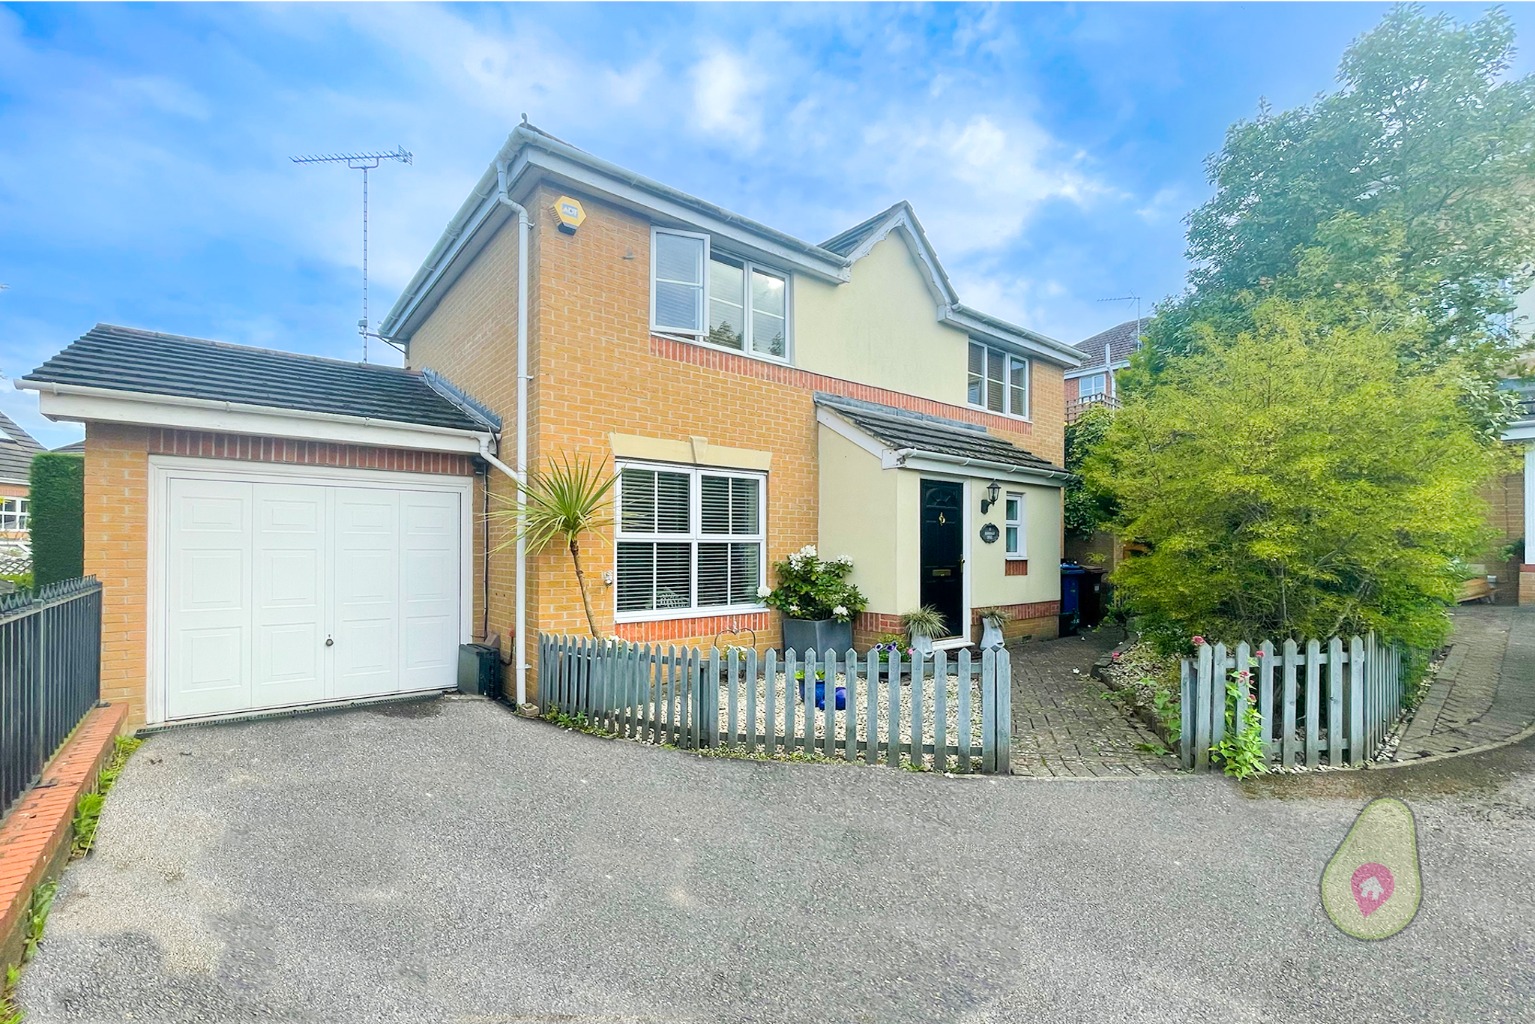 A beautifully presented and thoughtfully renovated three bed detached home - flexible accommodation with a large kitchen, lounge, garden room and bonus reception room from the converted garage, there is plenty of accommodation to utilise the layout to suit your way of living.